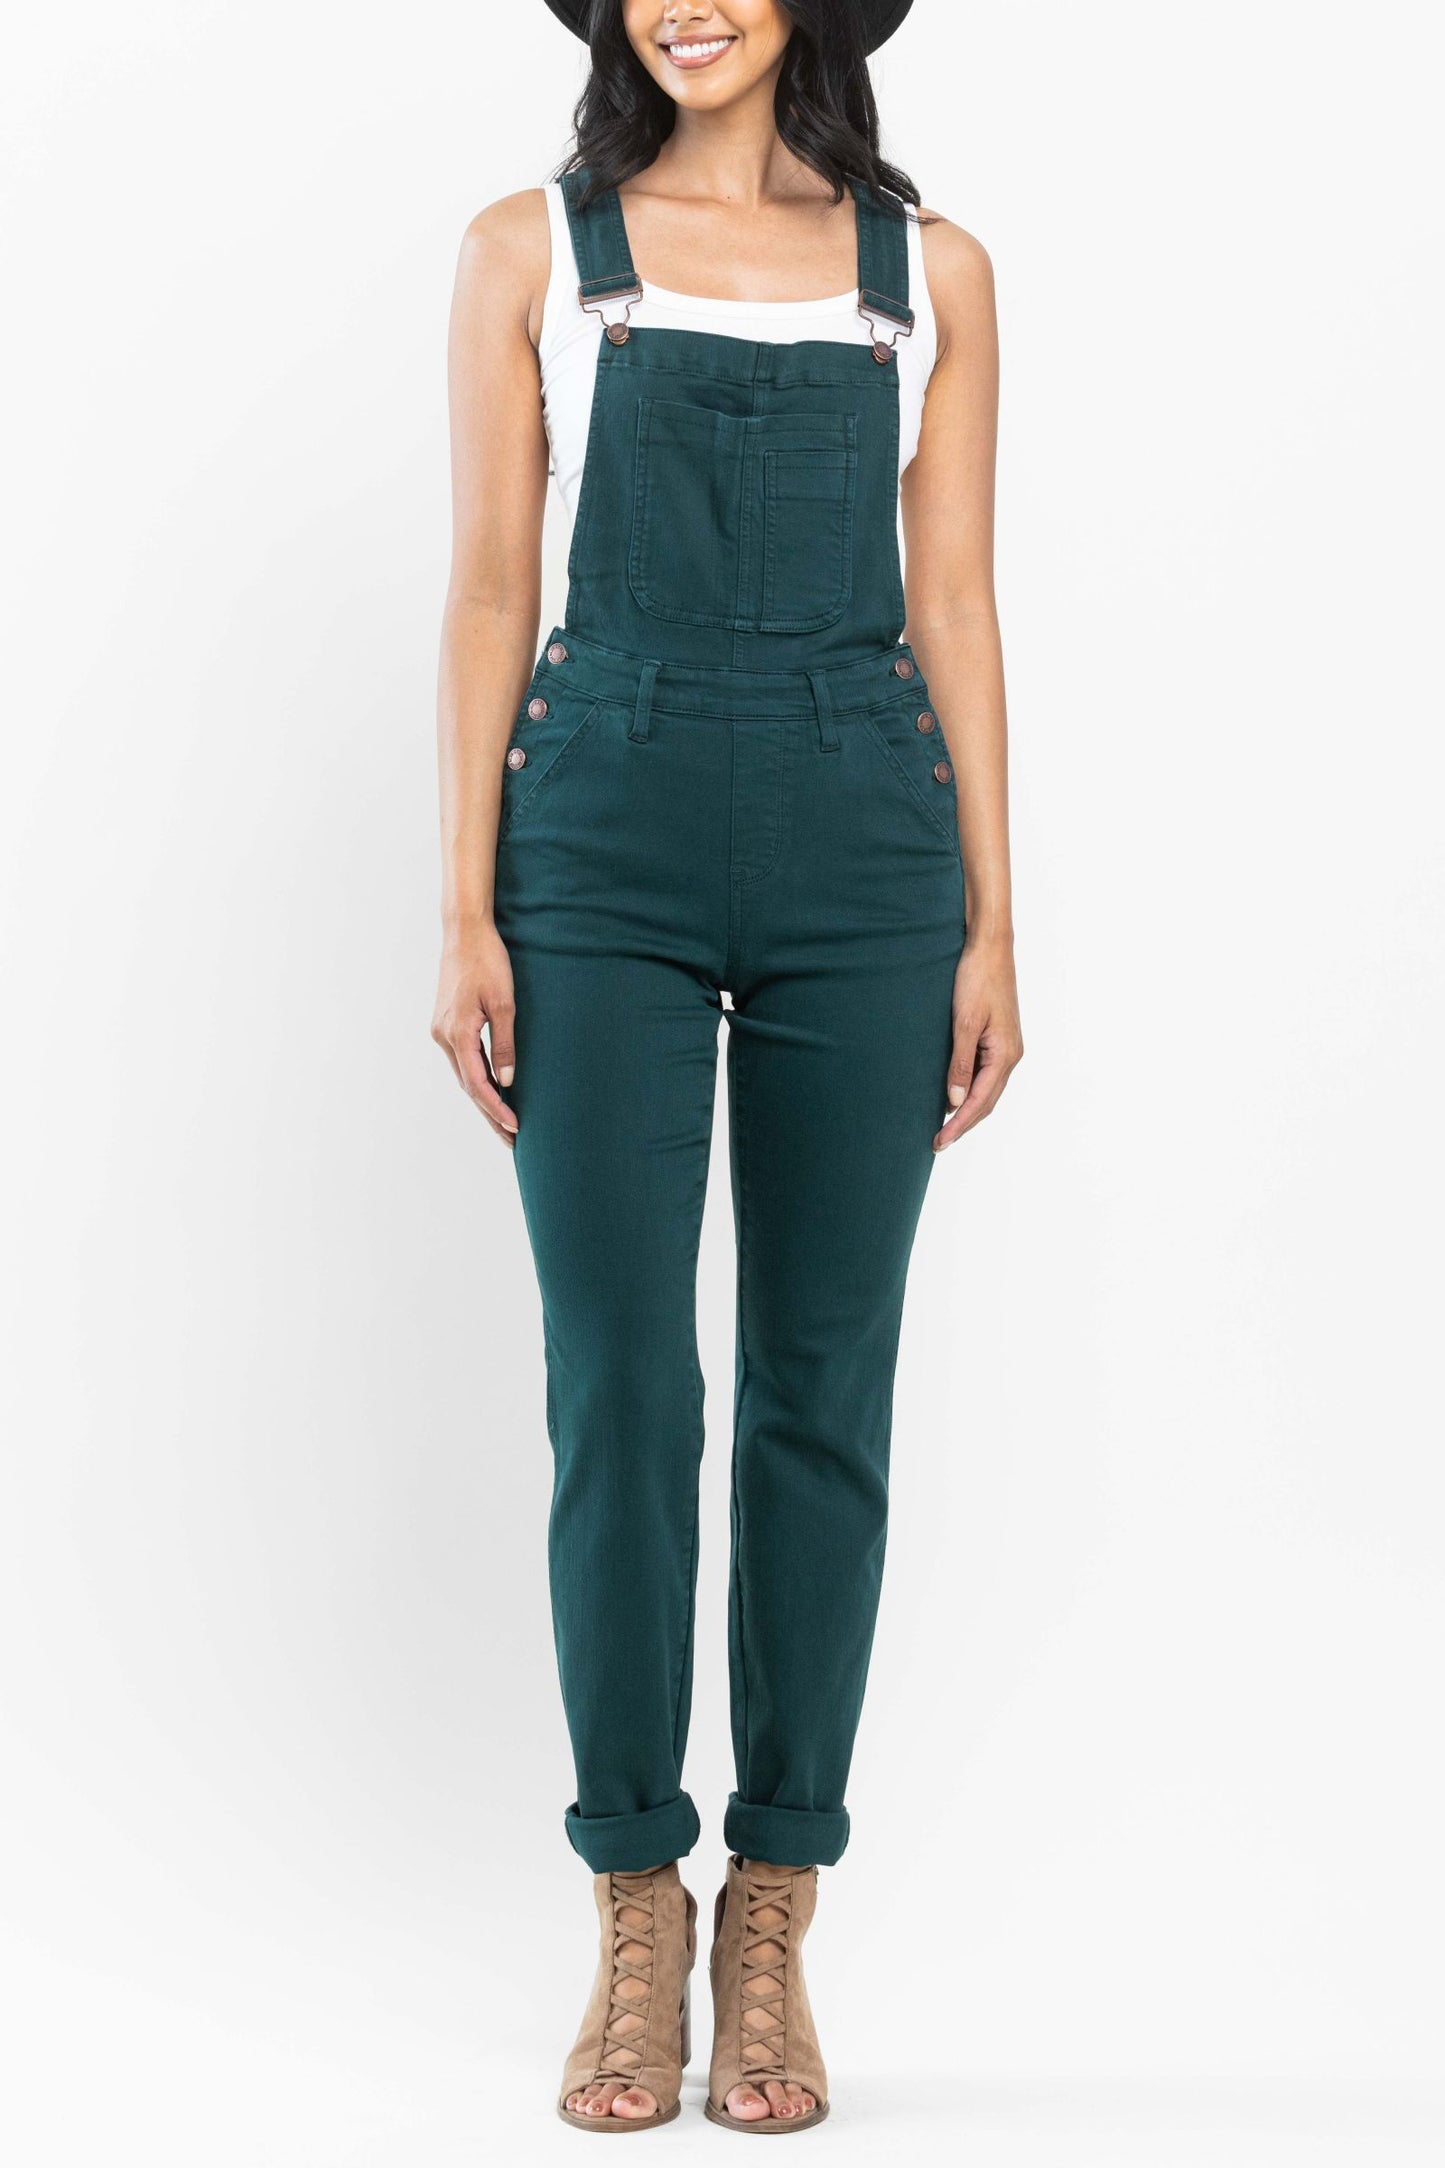 Teal Overalls